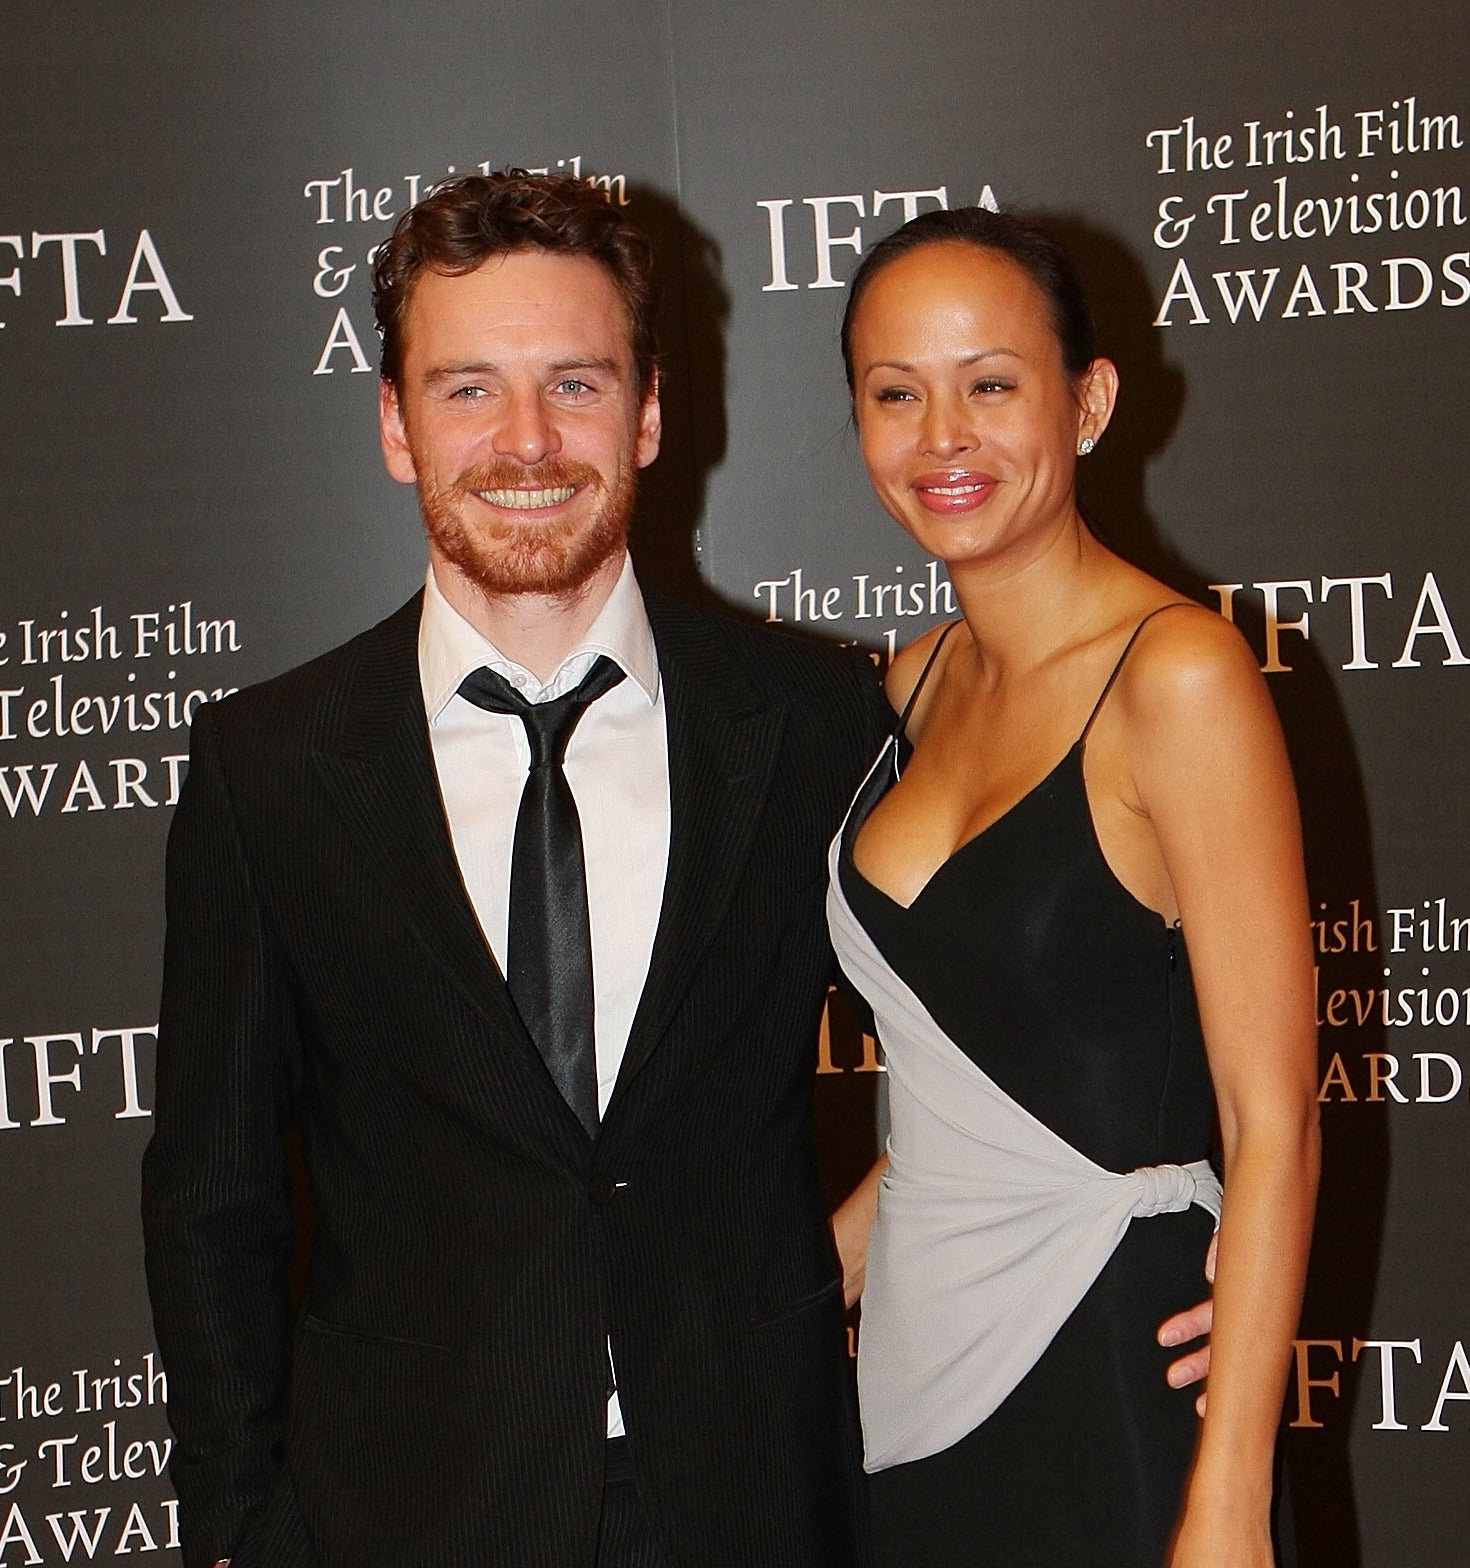 Michael Fassbender and Sunawin Andrews smile on the red carpet